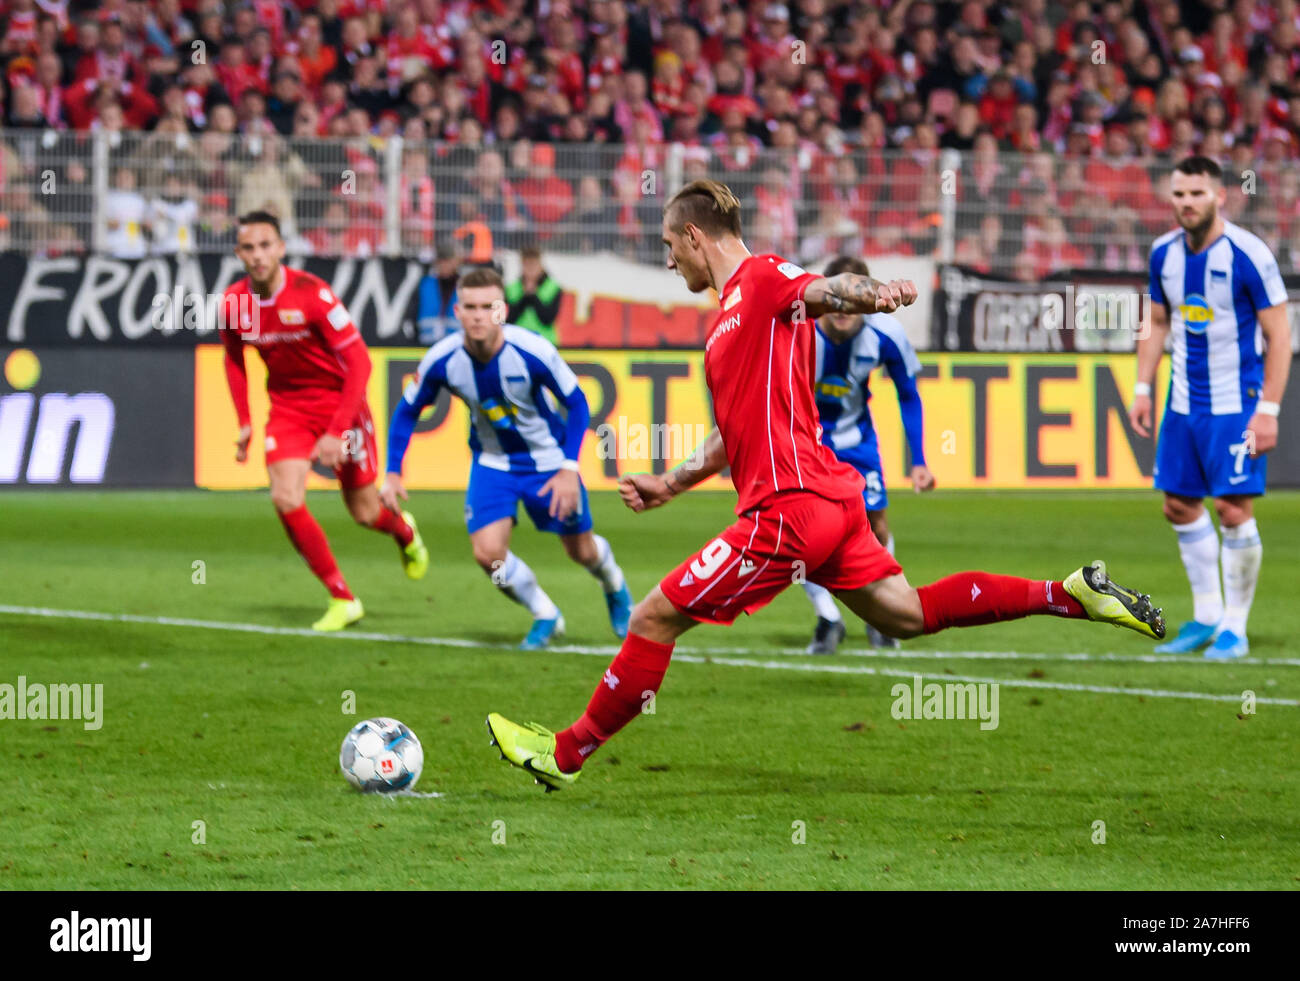 Berlin, Germany. 2nd Nov, 2019. Sebastian Polter of Union Berlin takes a scoring penalty kick during the German Bundesliga match against Hertha BSC in Berlin, capital of Germany, on Nov. 2, 2019. Credit: Kevin Voigt/Xinhua/Alamy Live News Stock Photo